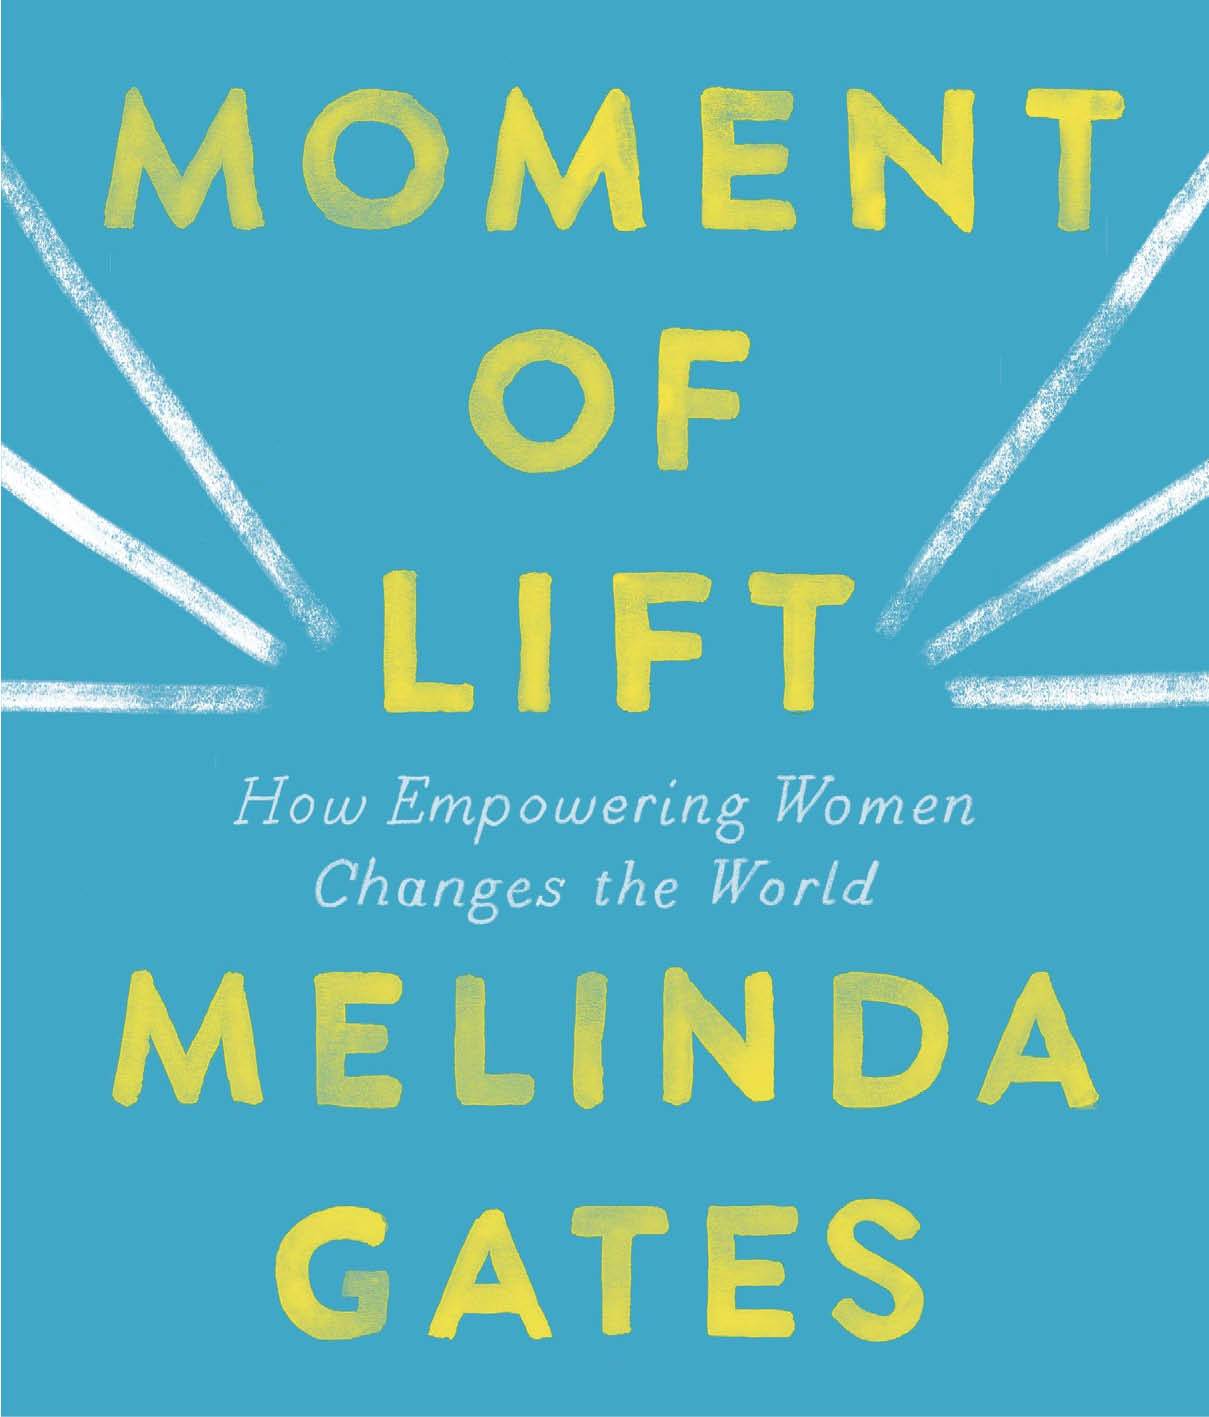 the　How　Feminist　Women　Empowering　Changes　World　The　The　Gates　Melinda　Shop　Moment　Lift:　of　by